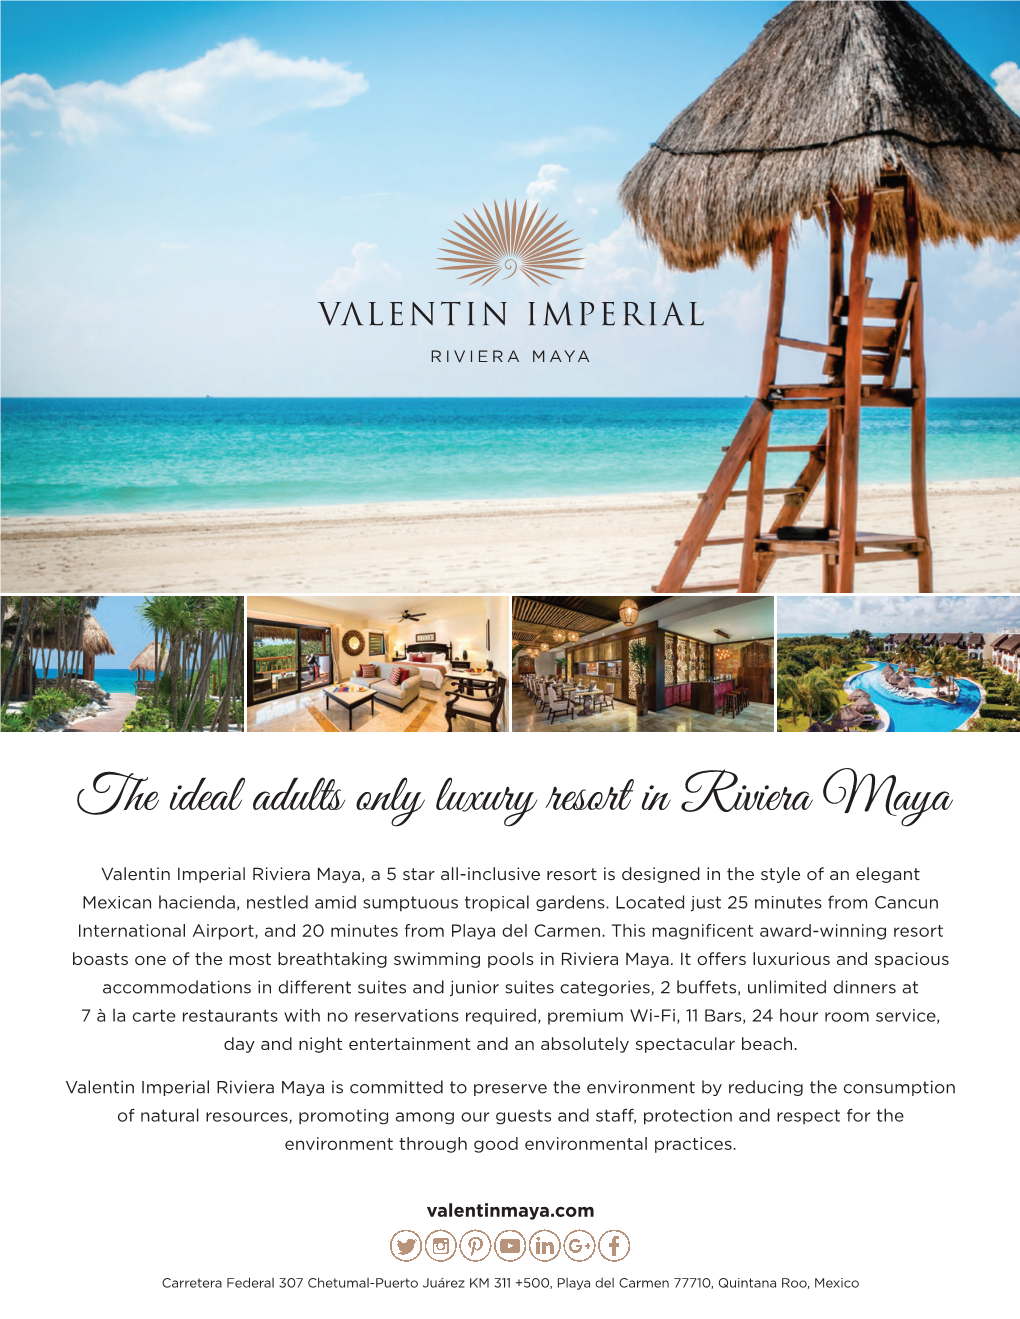 The Ideal Adults Only Luxury Resort in Riviera Maya